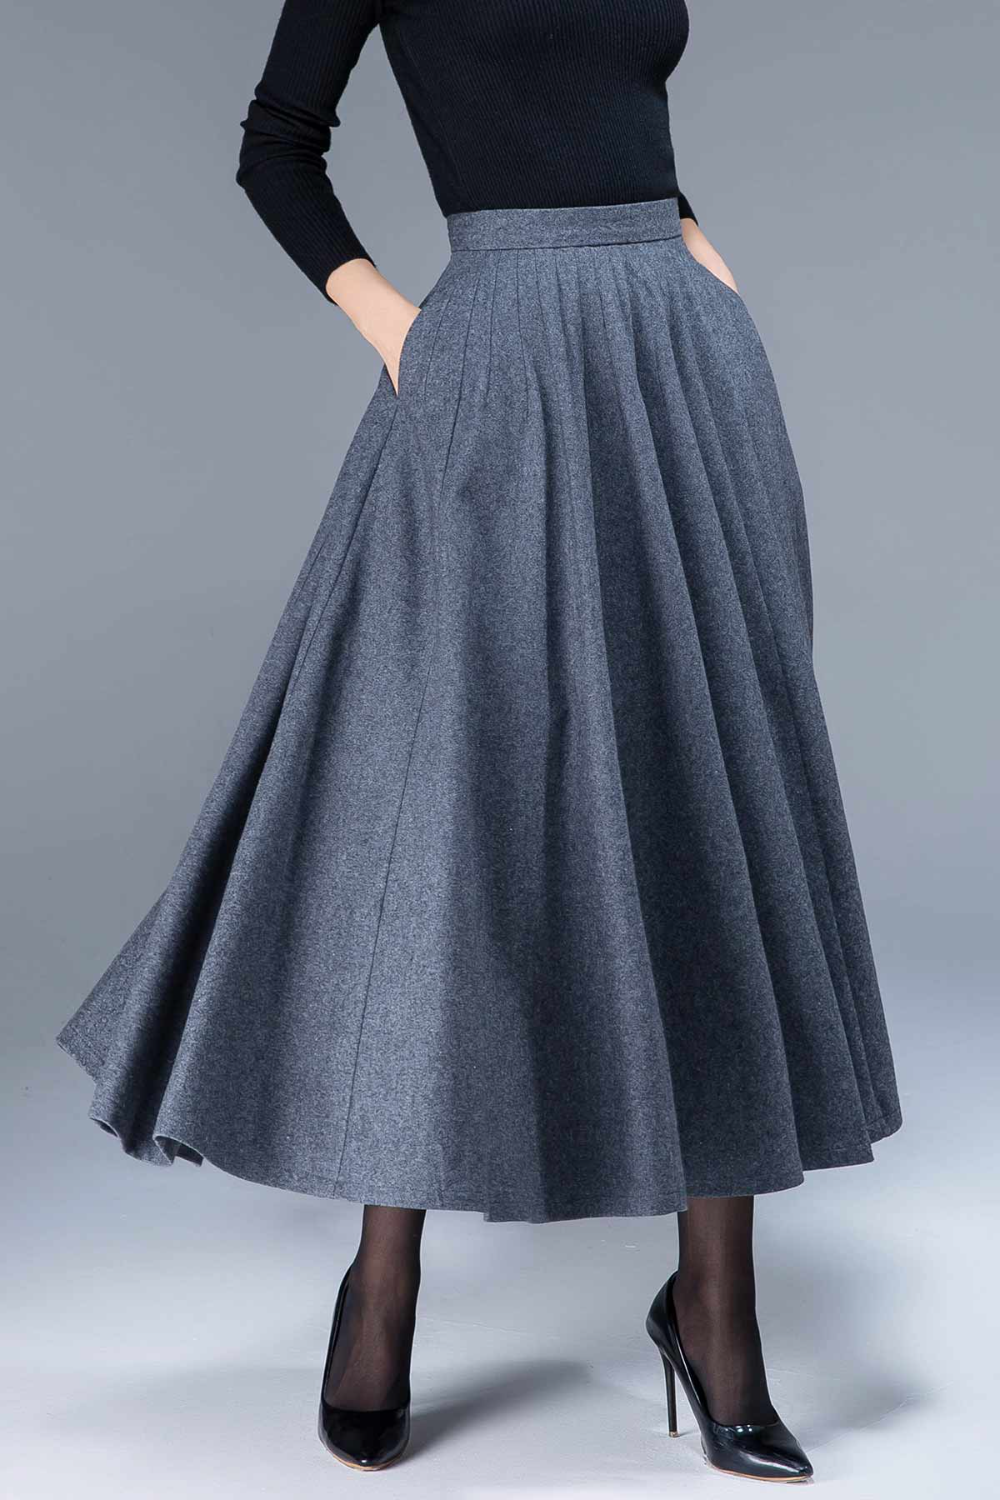 Wool Skirts: Classic Comfort and Style